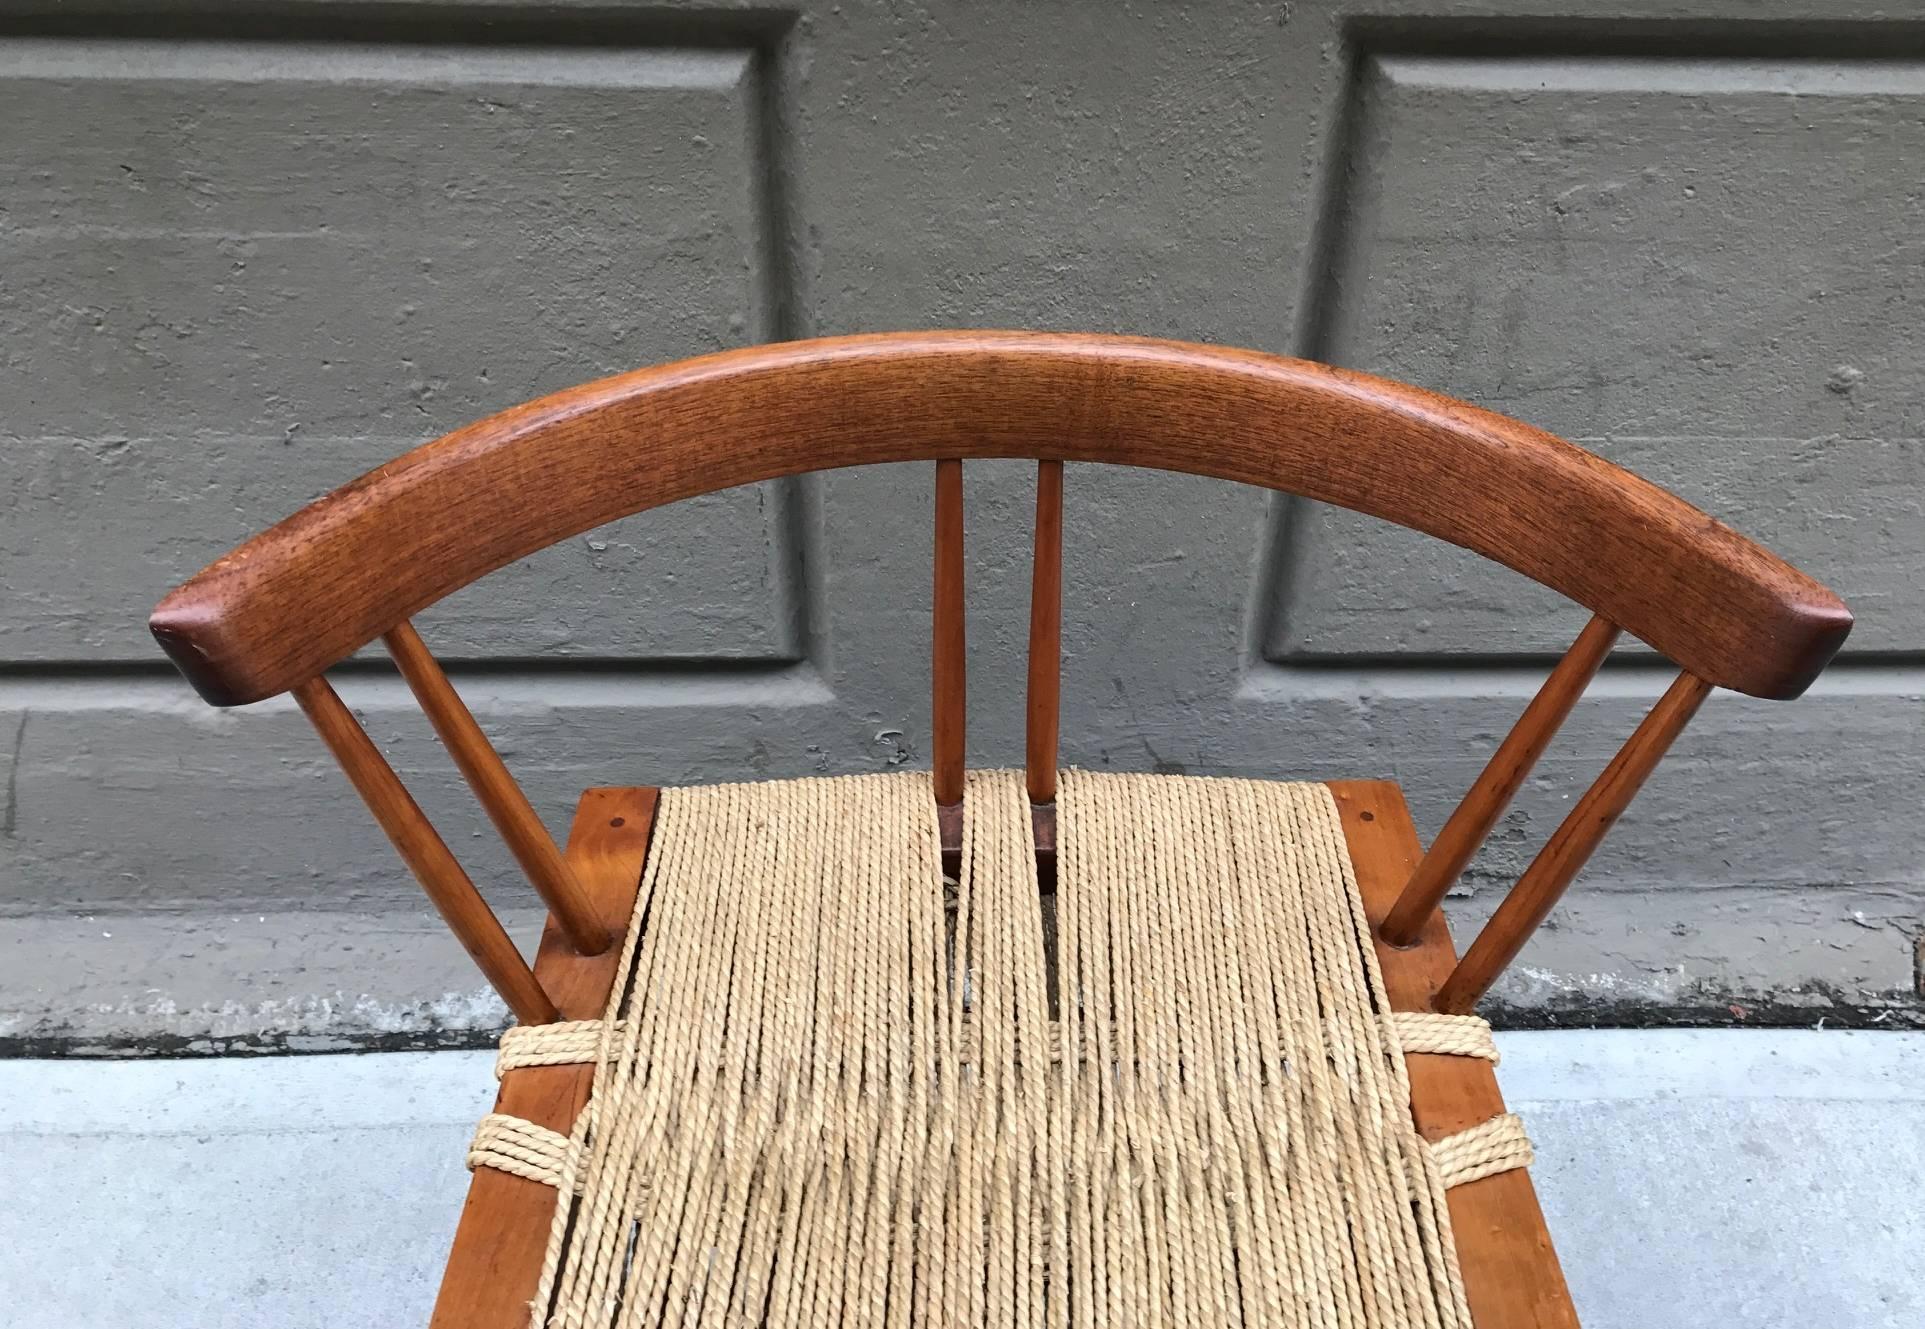 grass-seated chair